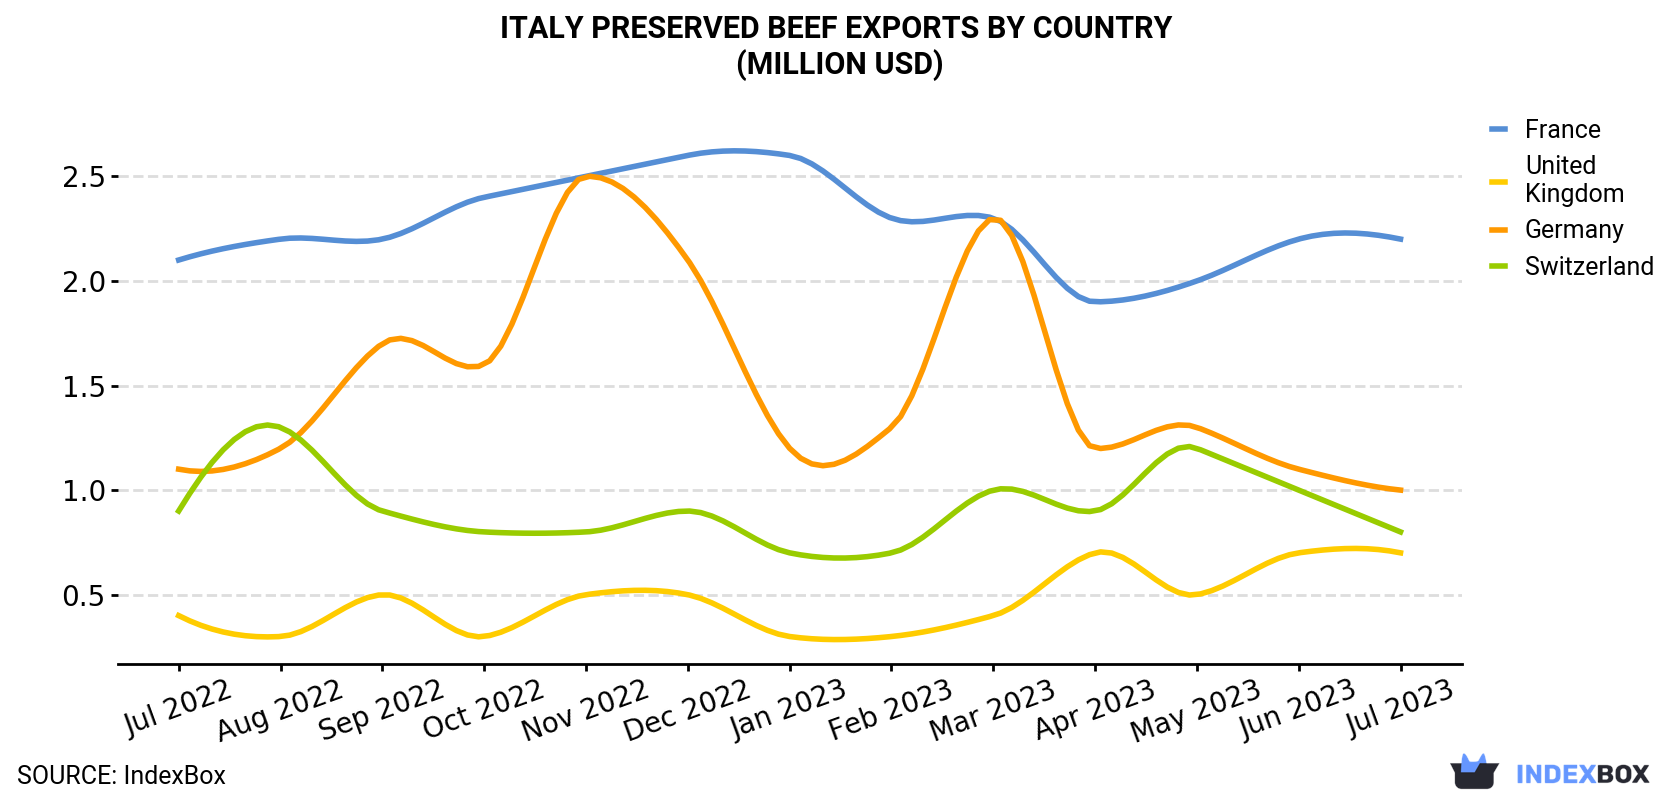 Italy Preserved Beef Exports By Country (Million USD)